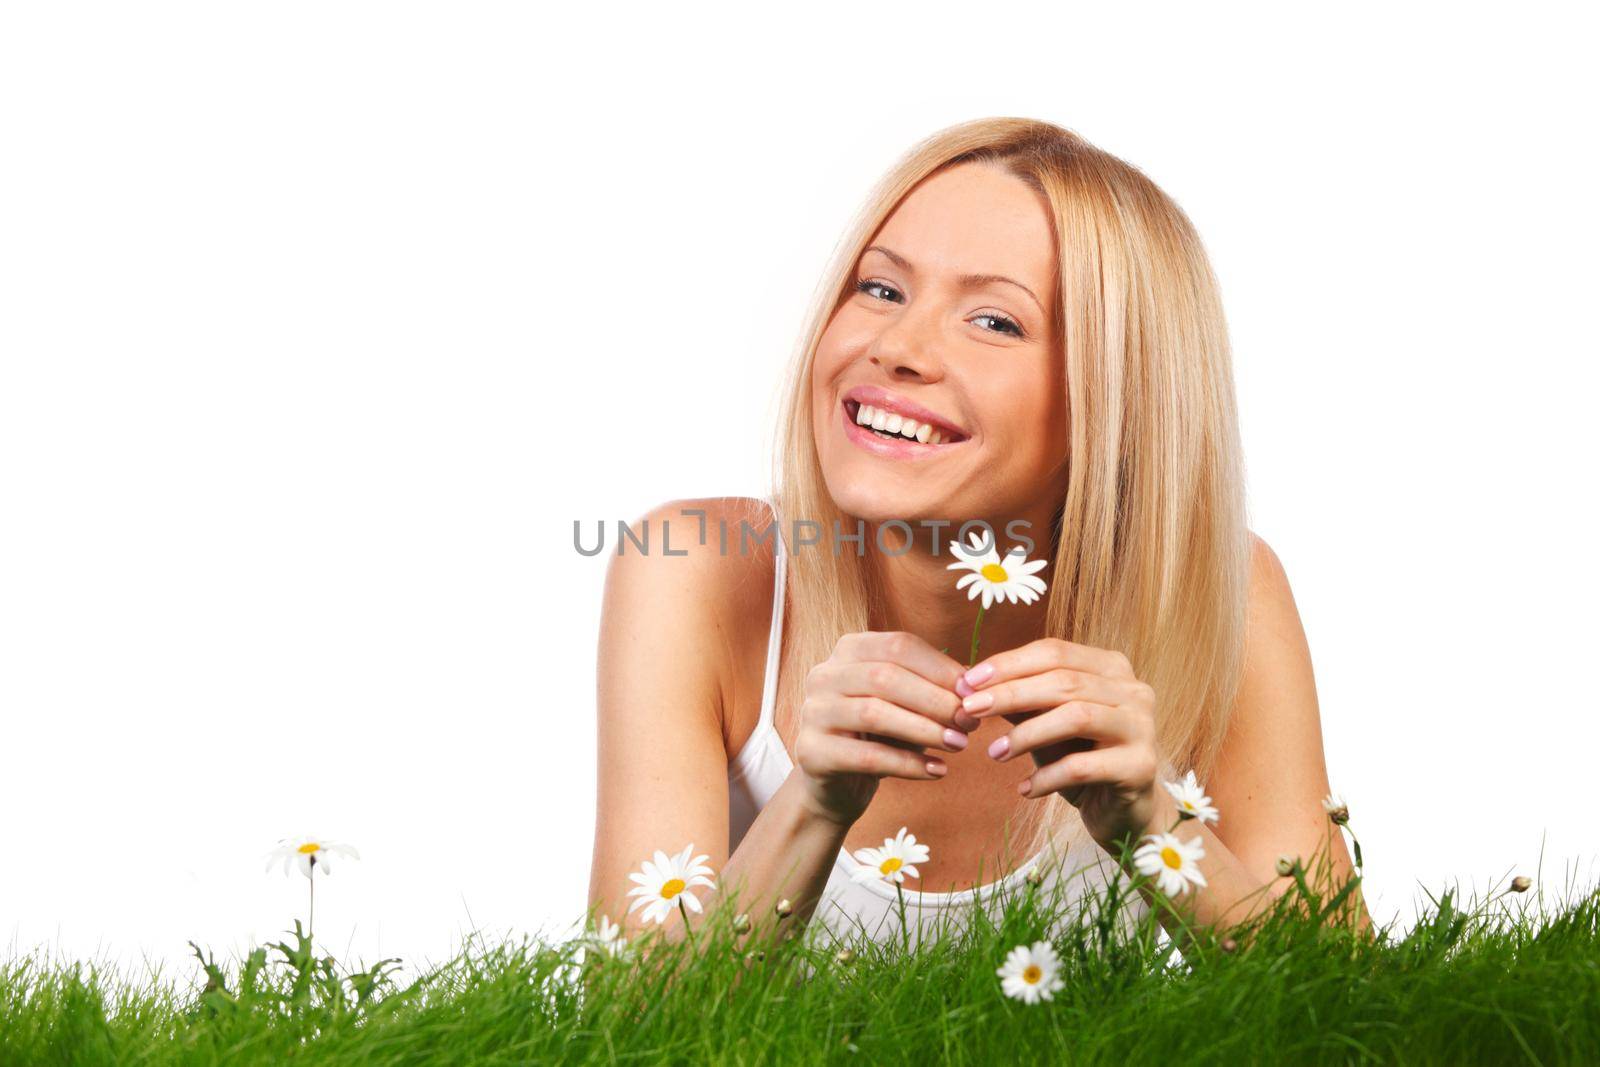 Woman on grass with flowers by Yellowj